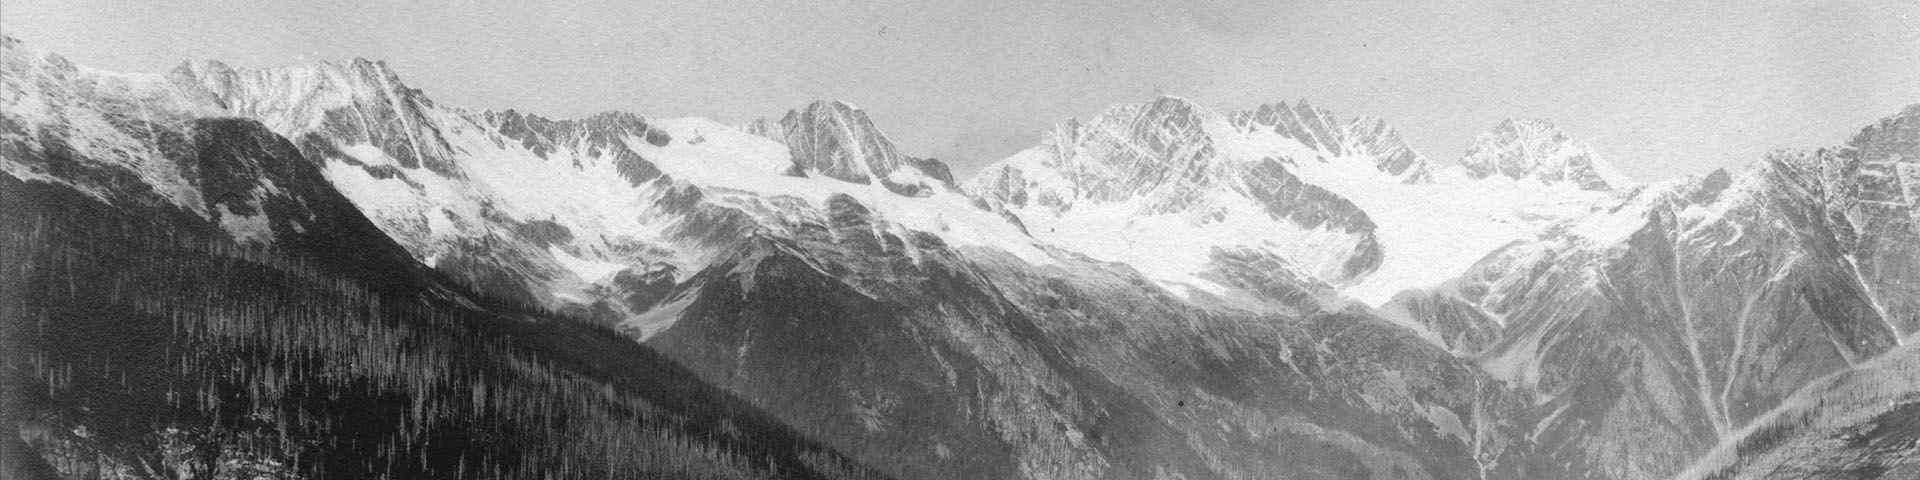 Black and white photo of the the swiss peaks in rogers pass